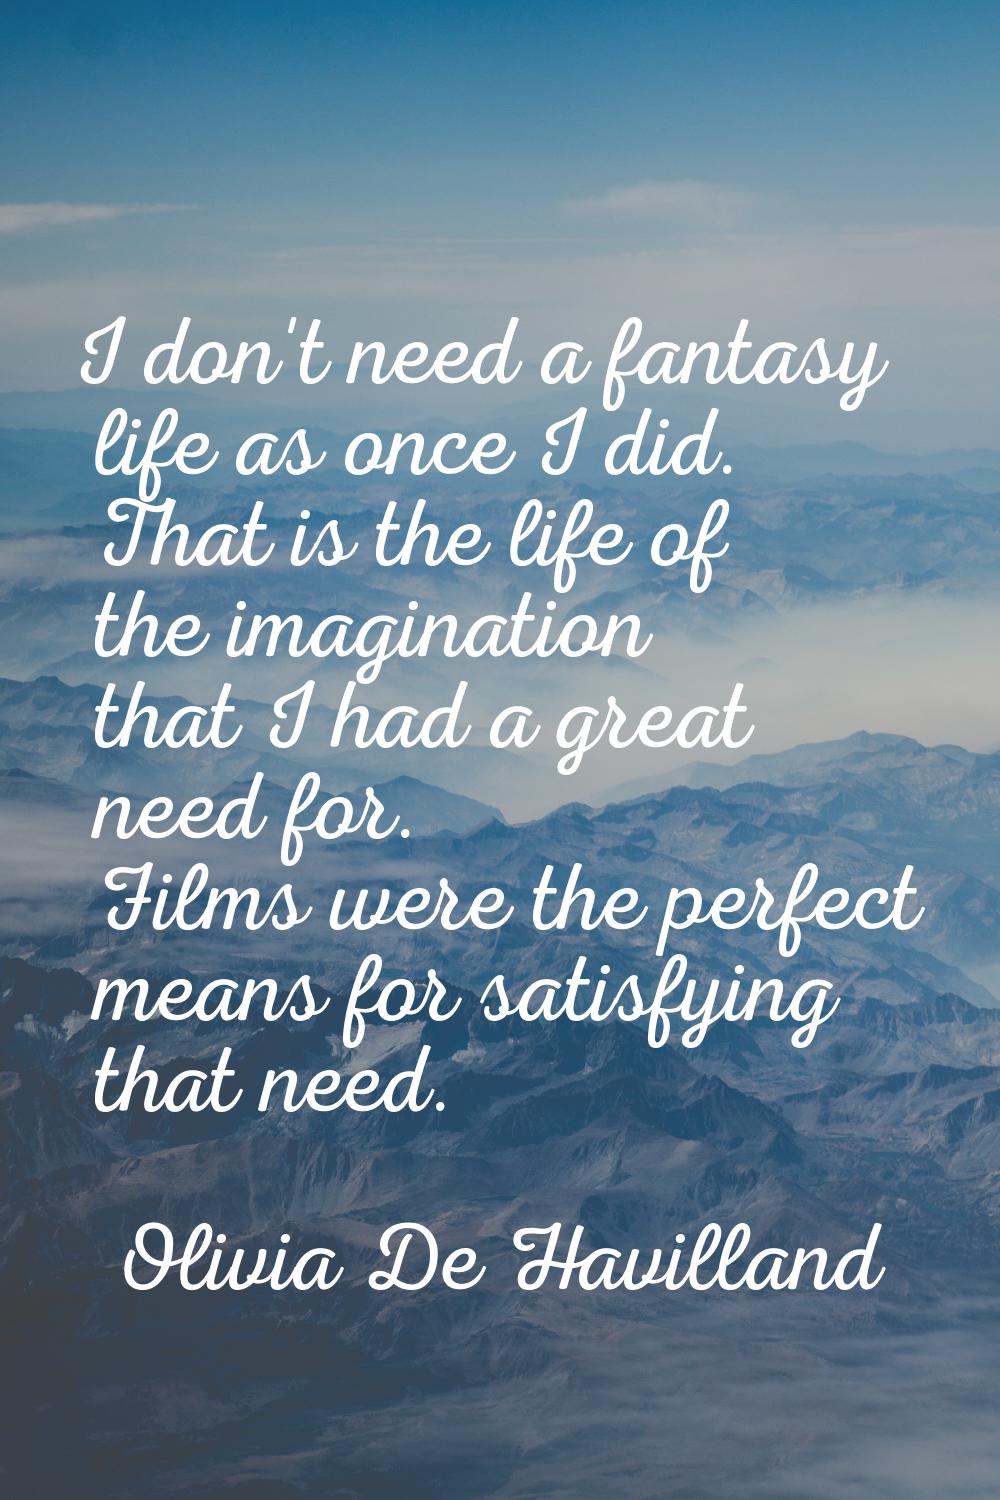 I don't need a fantasy life as once I did. That is the life of the imagination that I had a great n